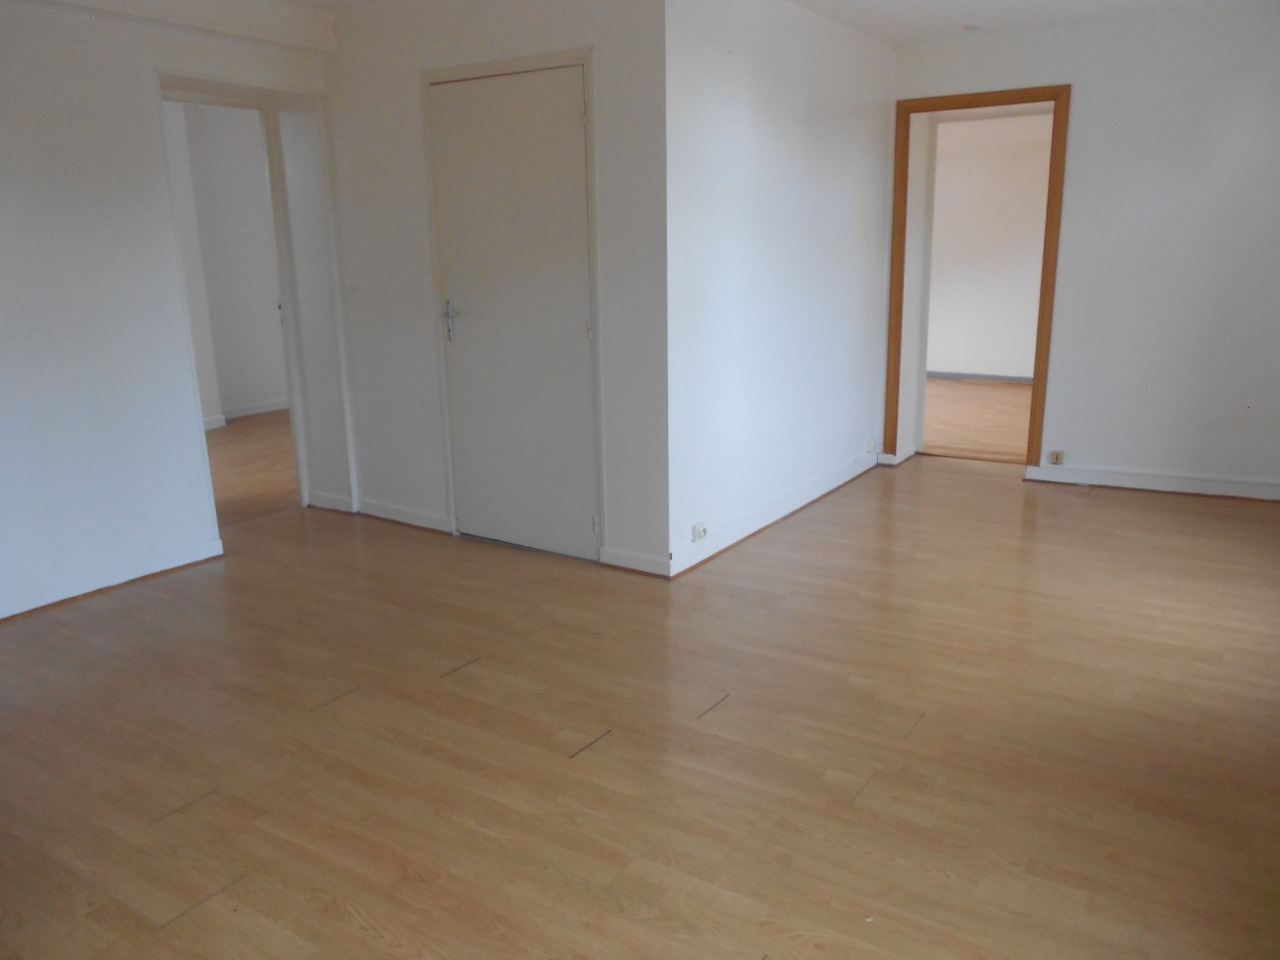 Location appartement 59136 Wavrin - Appartement T3 Wavrin centre